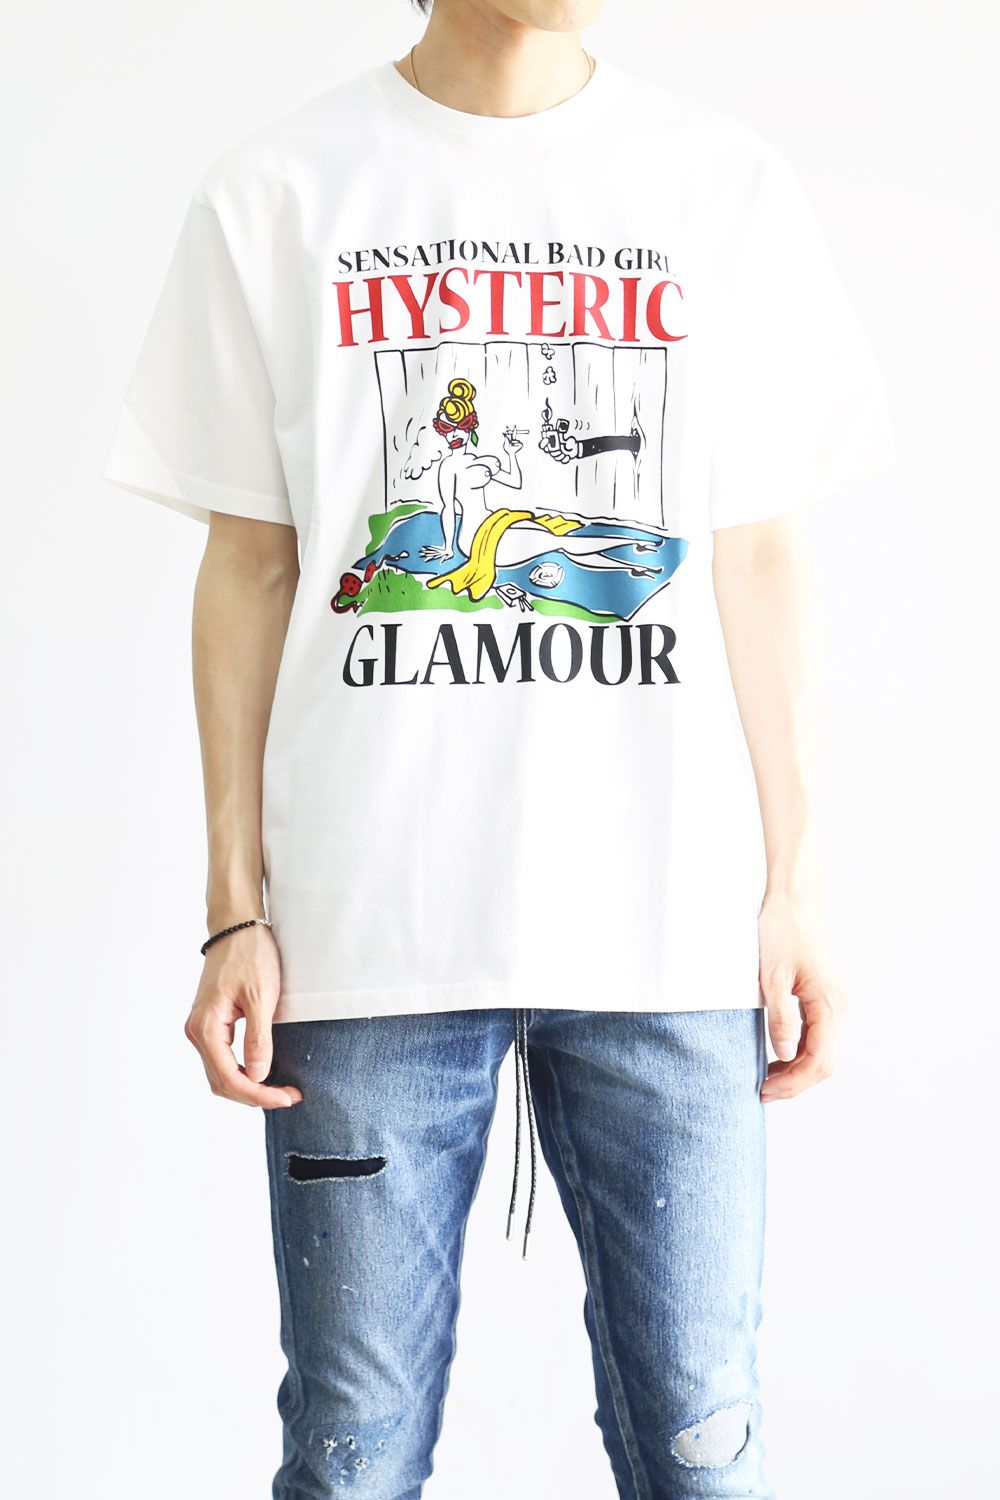 HYSTERIC GLAMOUR - MISS HYSTERIC GARDEN Tシャツ / ホワイト | Tempt